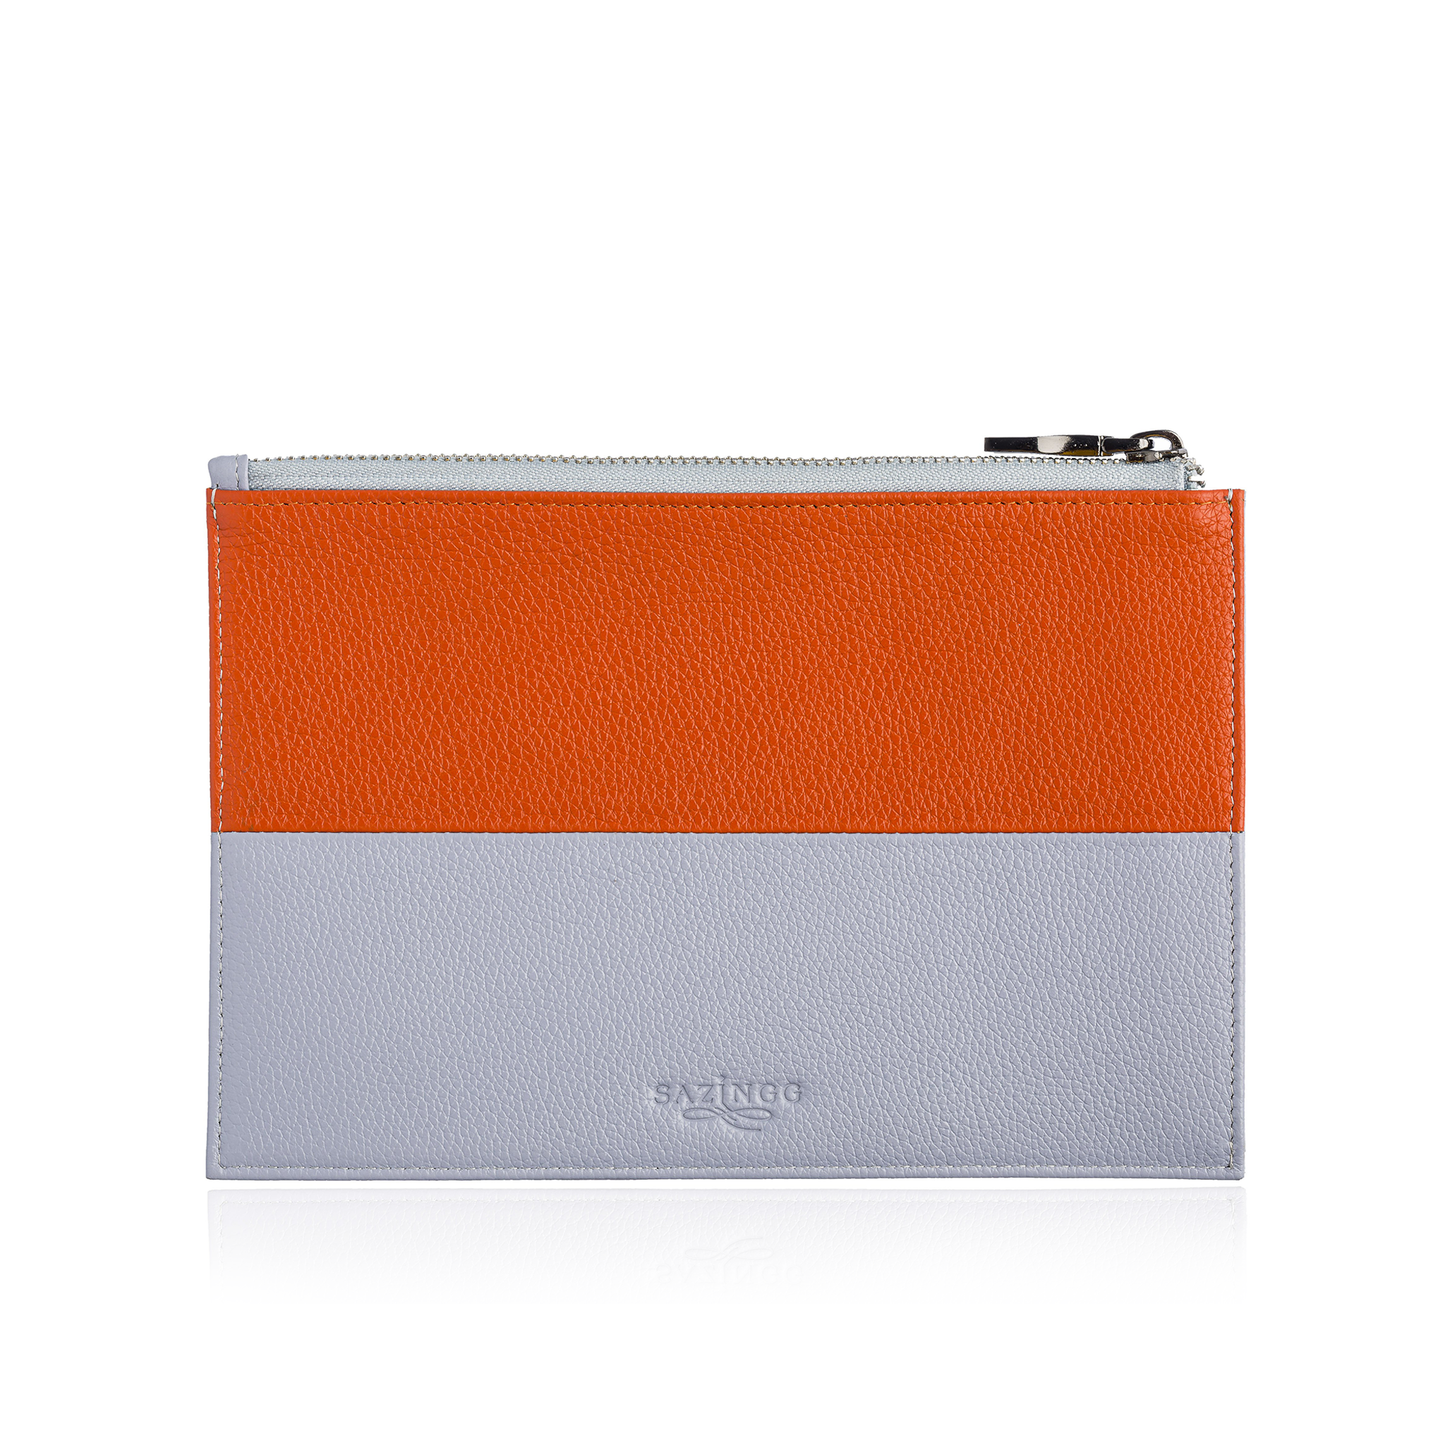 Zip Pouch in Orange & Grey Leather